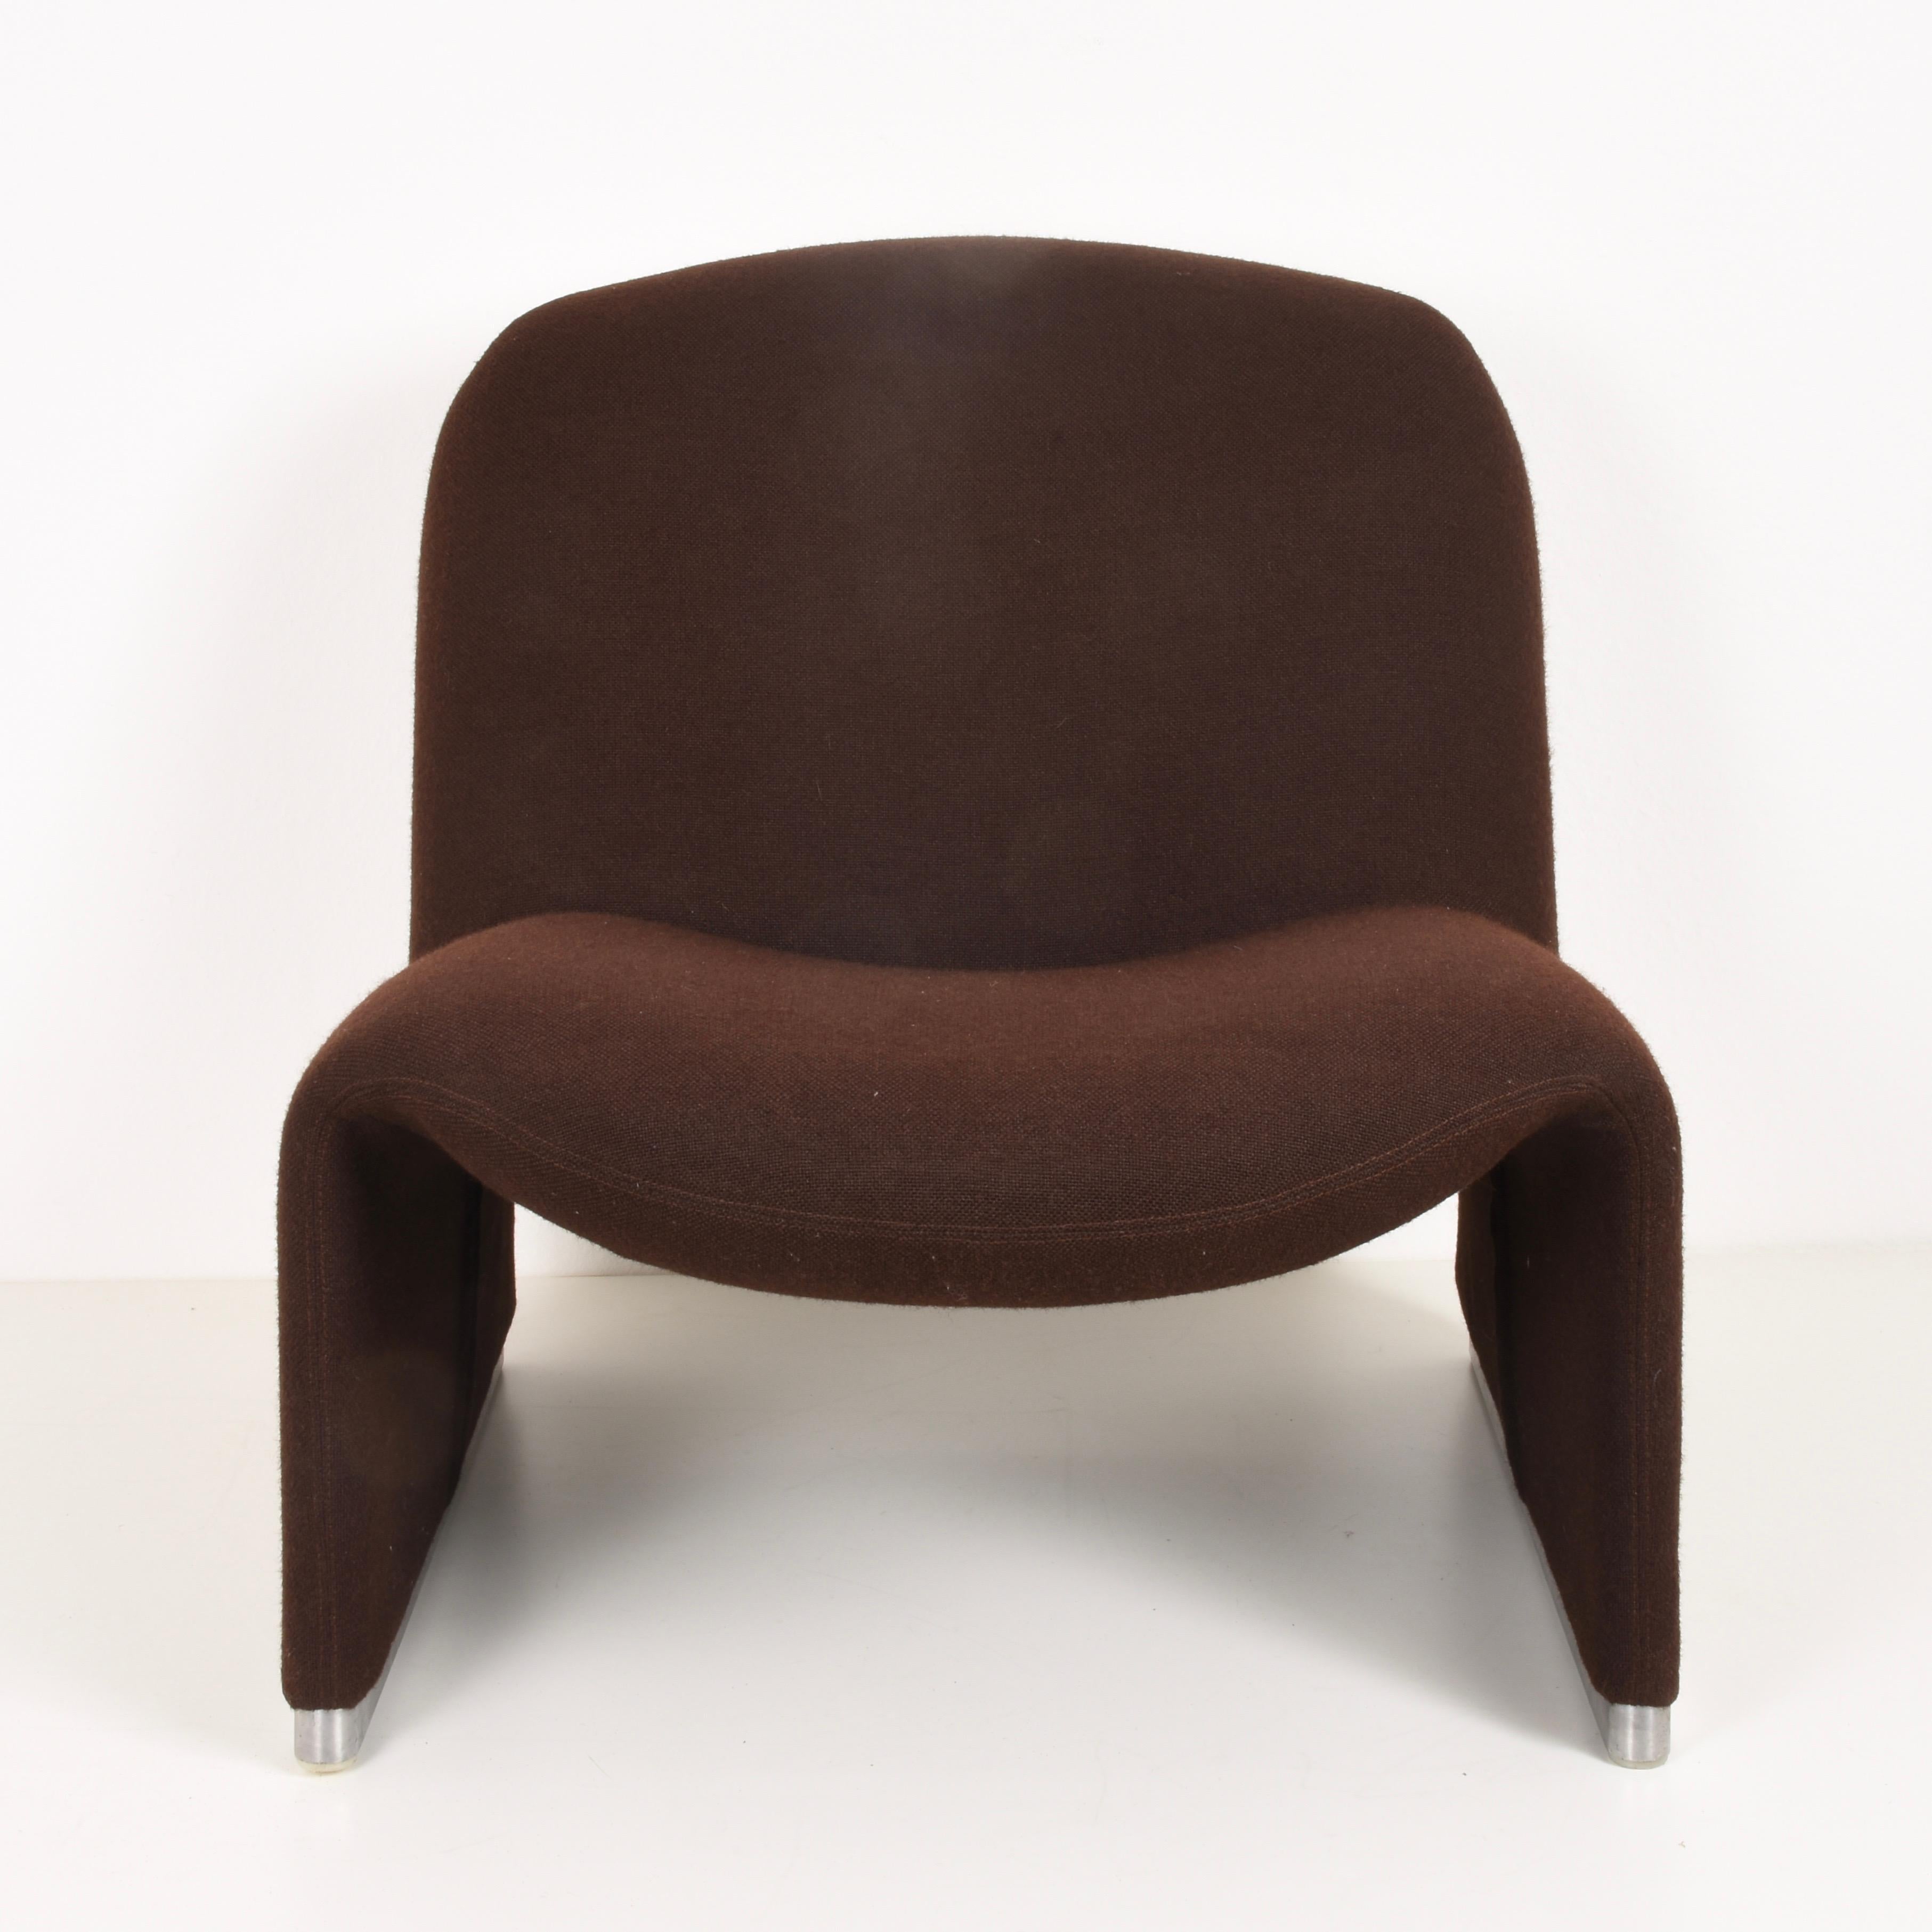 2 pieces available - Brown armchairs, Alky model by Giancarlo Piretti. Produced by Castelli in Italy in the 1970s
Very comfortable. Original brown fabric. Made with foam. Aluminium base good condition.
Marked on the bottom.